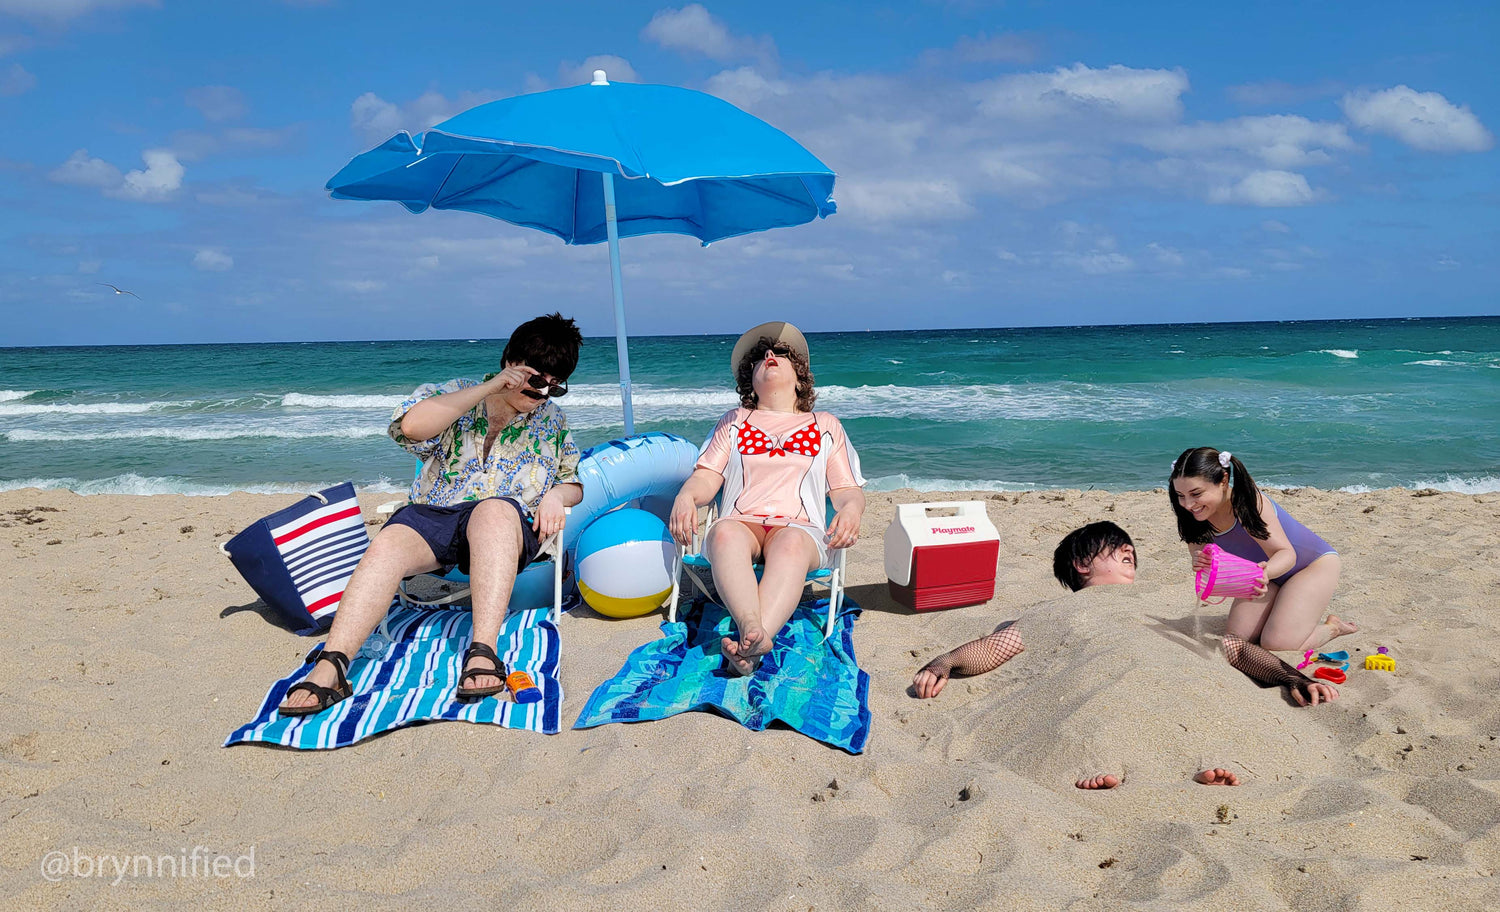 The Brynn's March Photoshopped Family Photo at The Beach